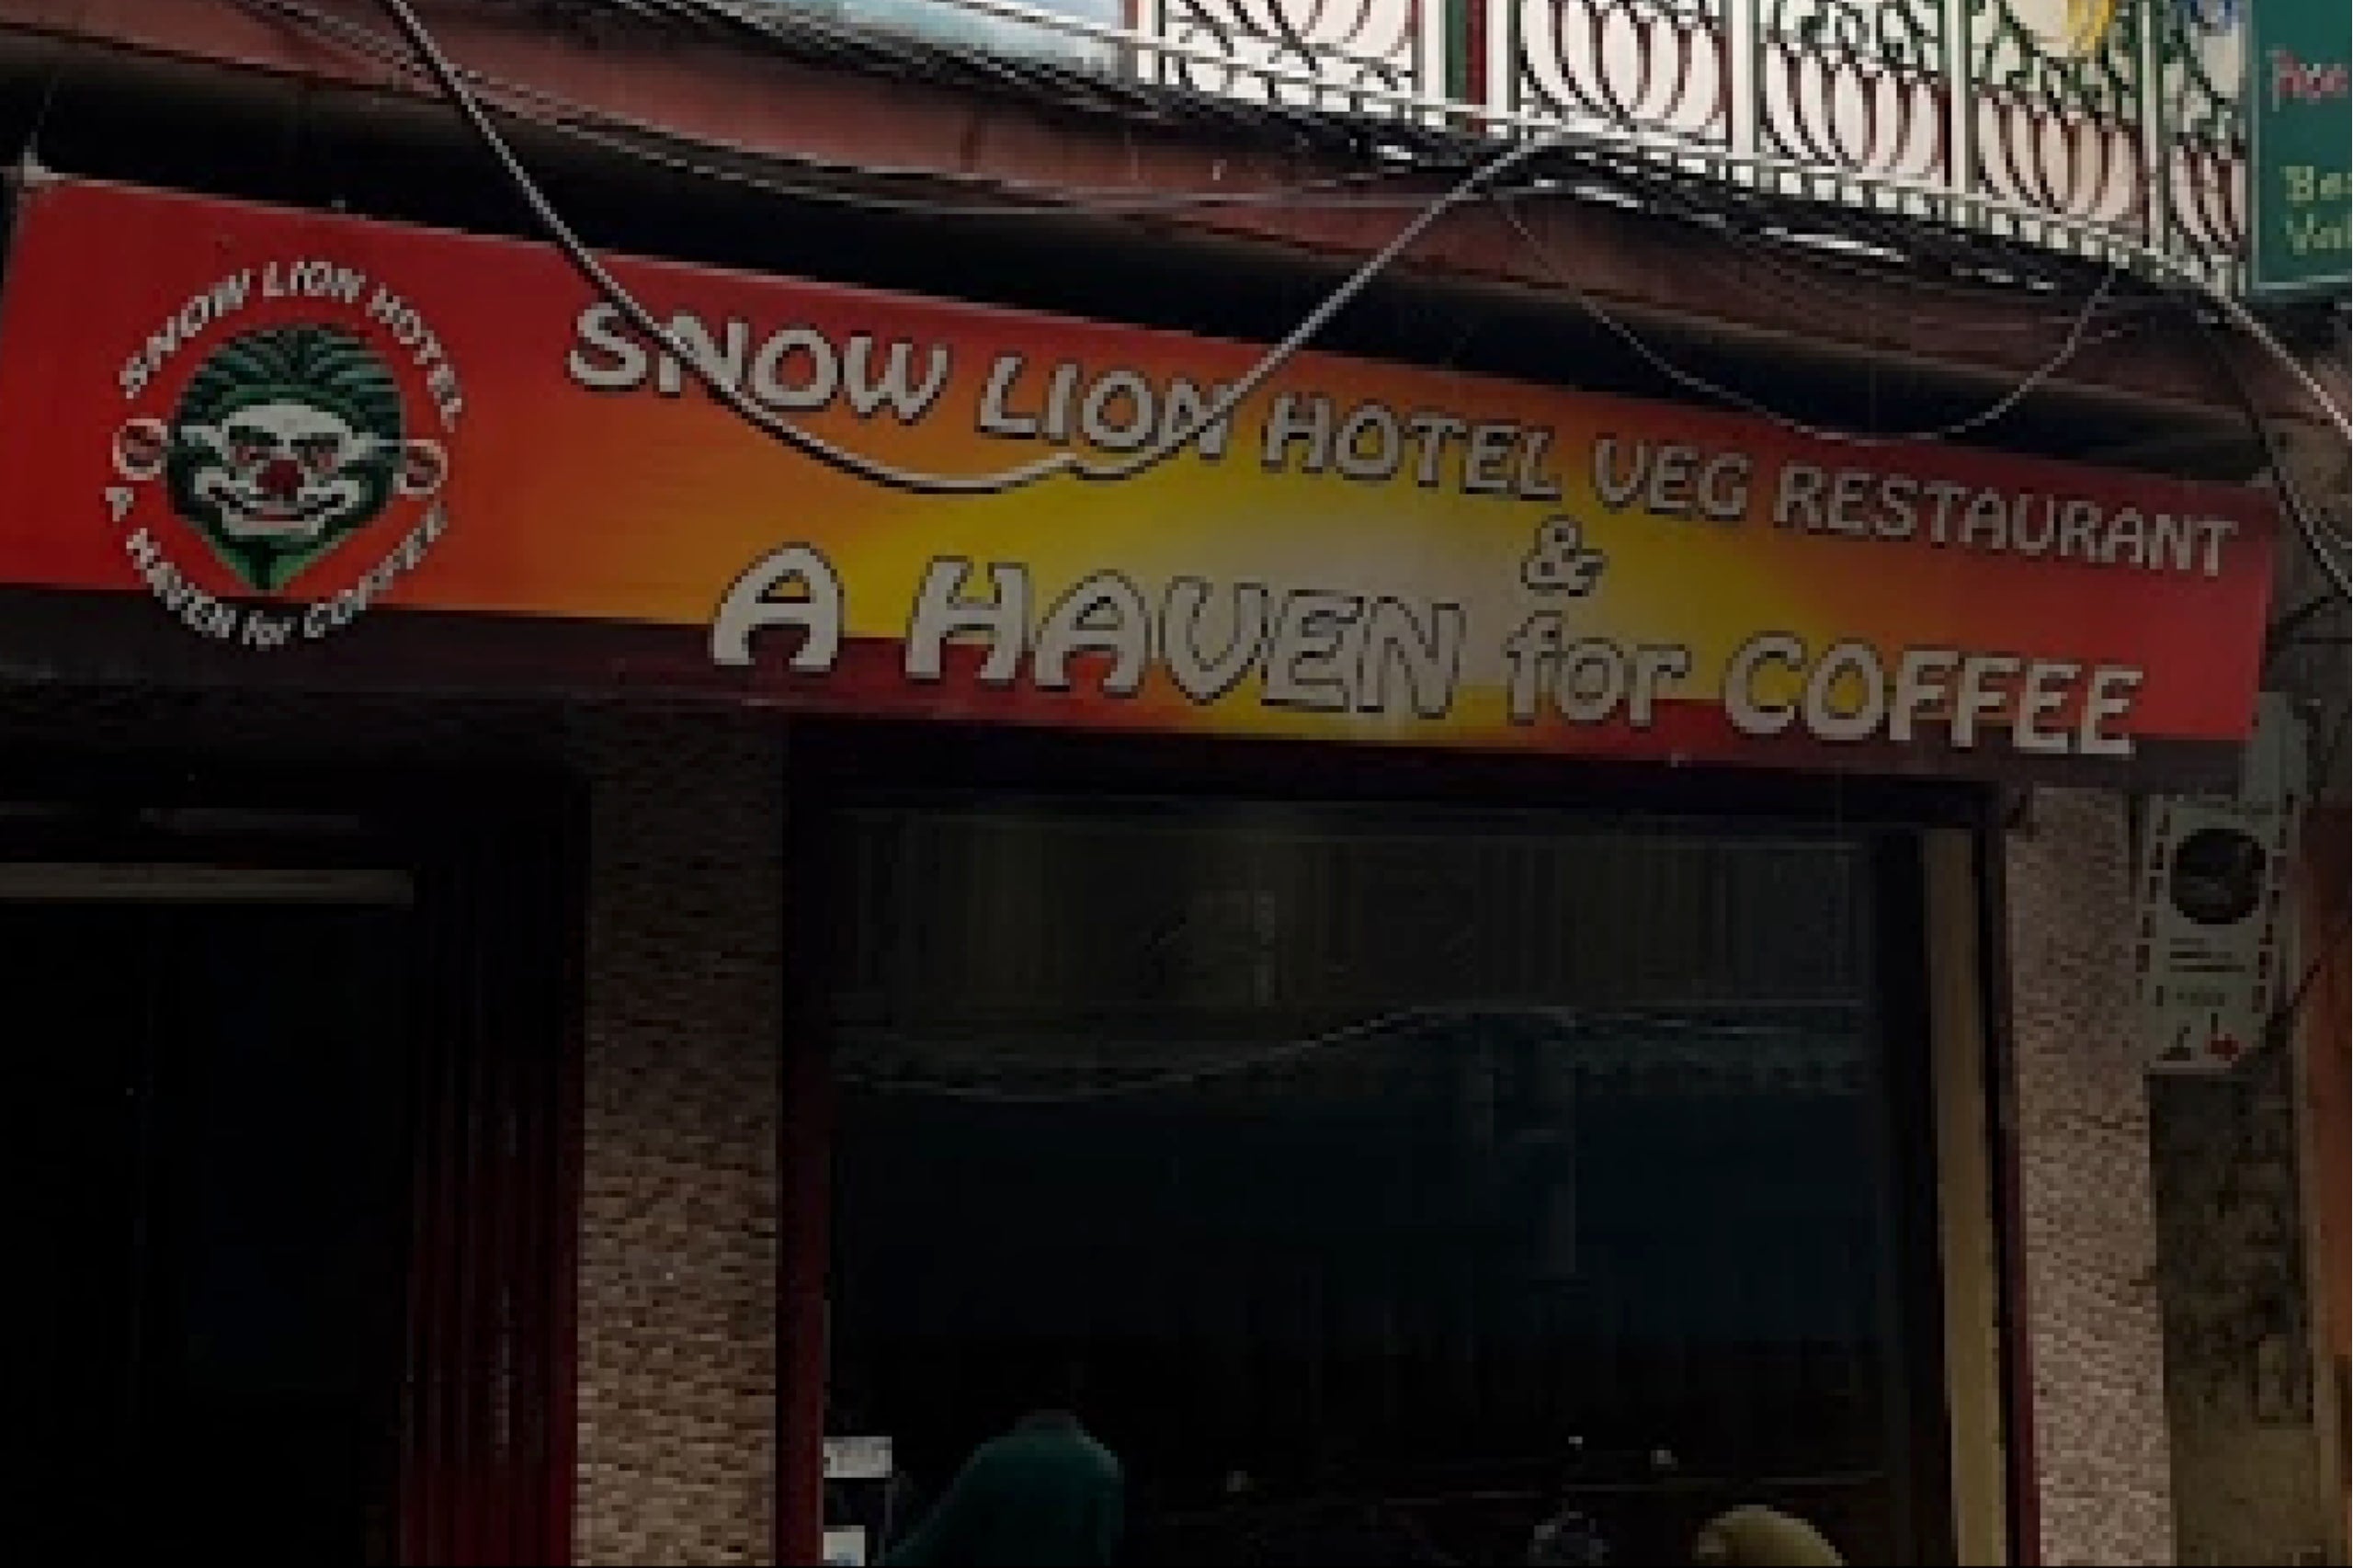 Snow Lion Hotel and Restaurant